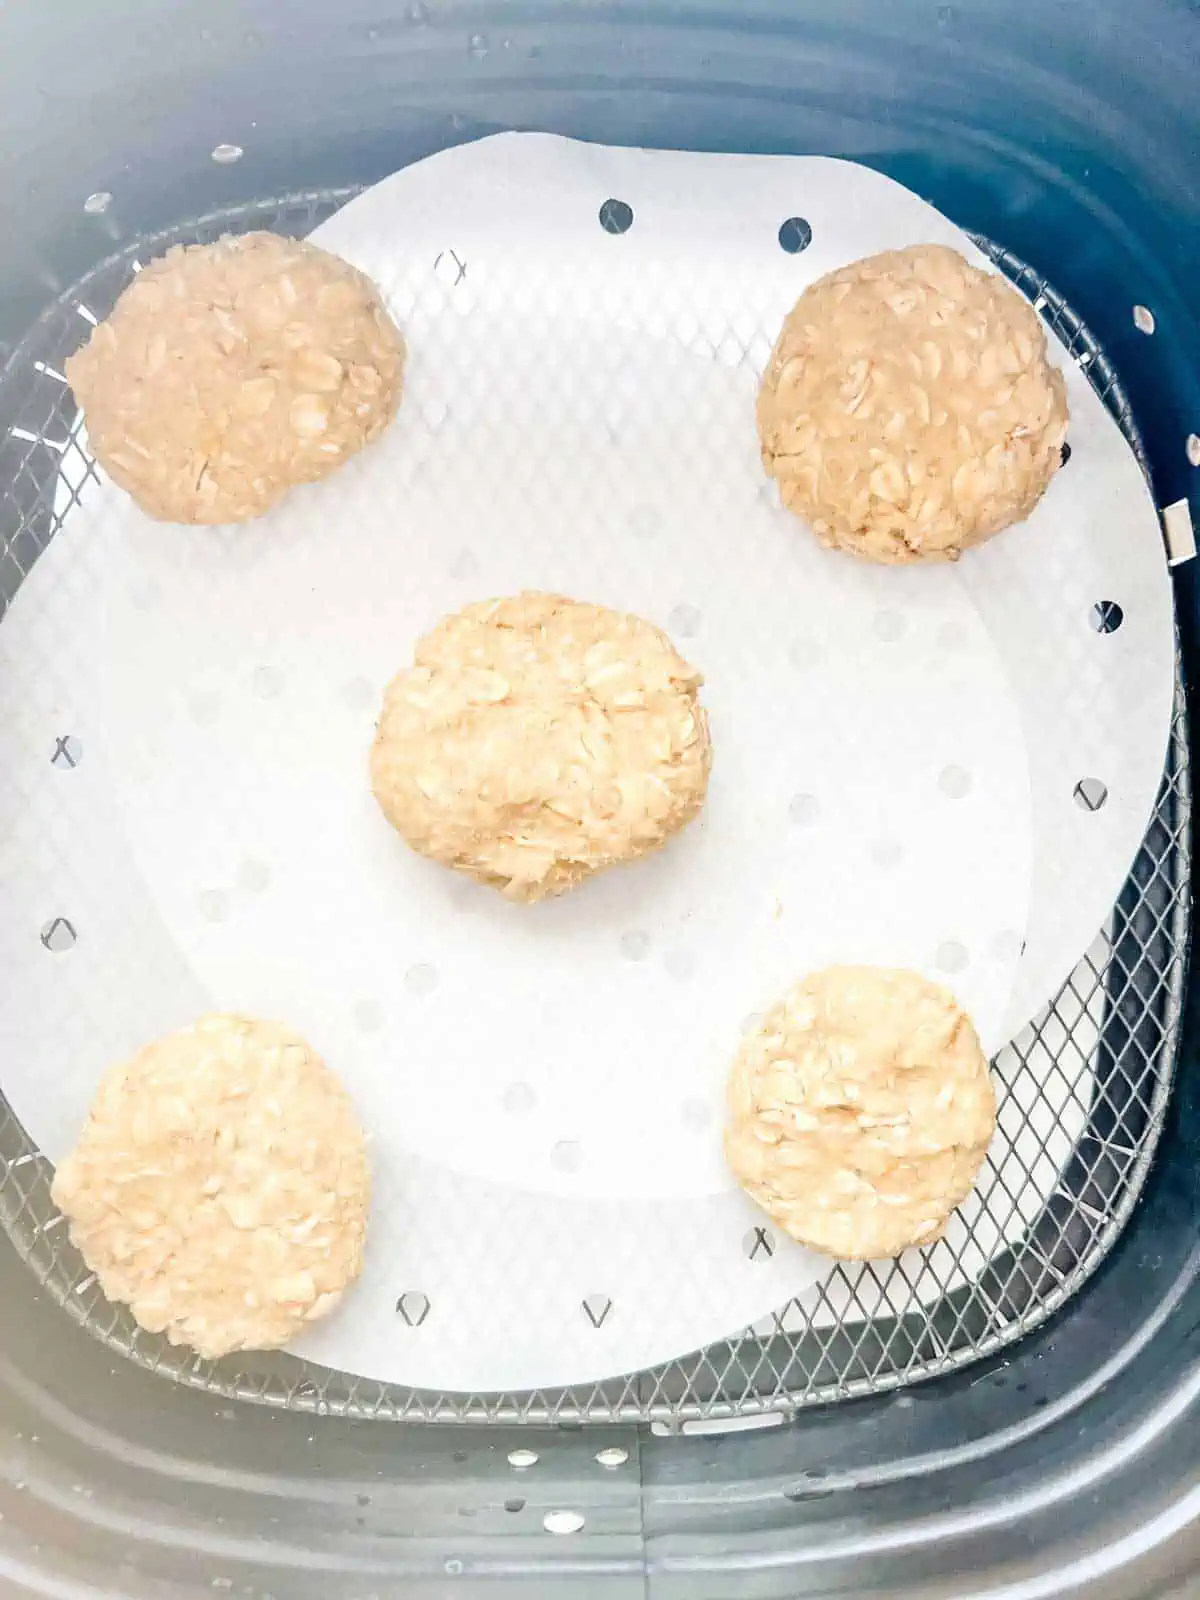 Air fryer basket with cookies ready to cook.